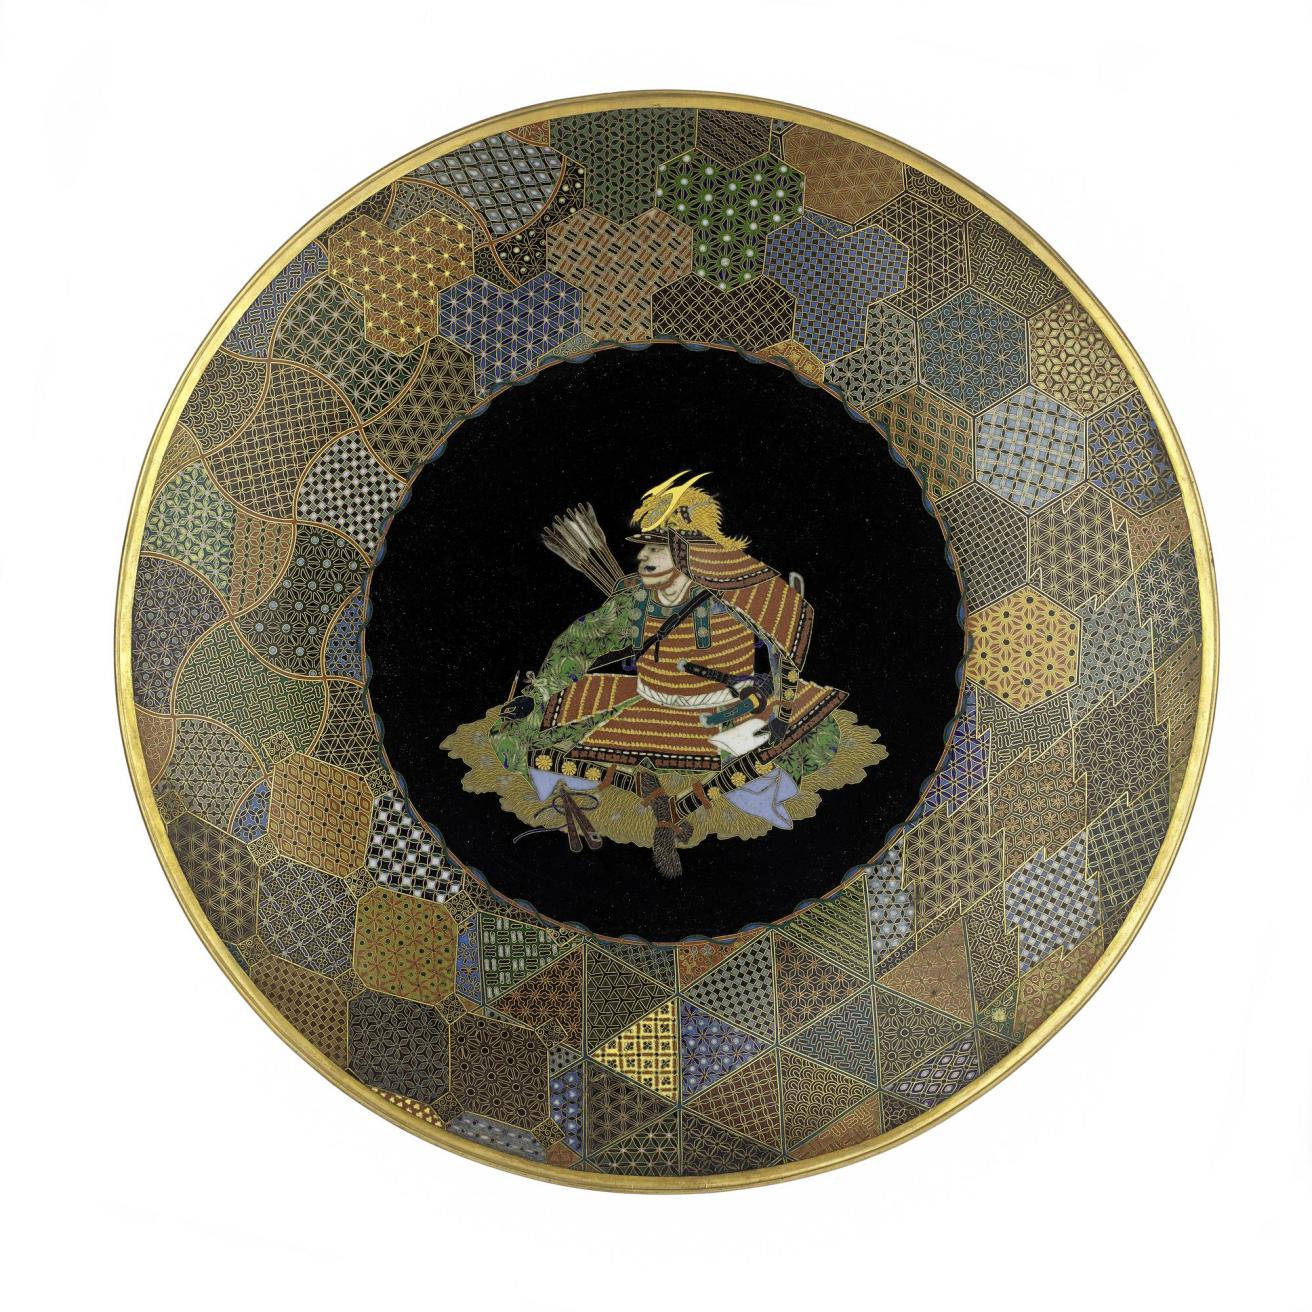 Dish of copper and cloisonne enamel with a seated figure of a warrior in centre: Japan, Yokohama, by Goto Seizaburo, c1880.